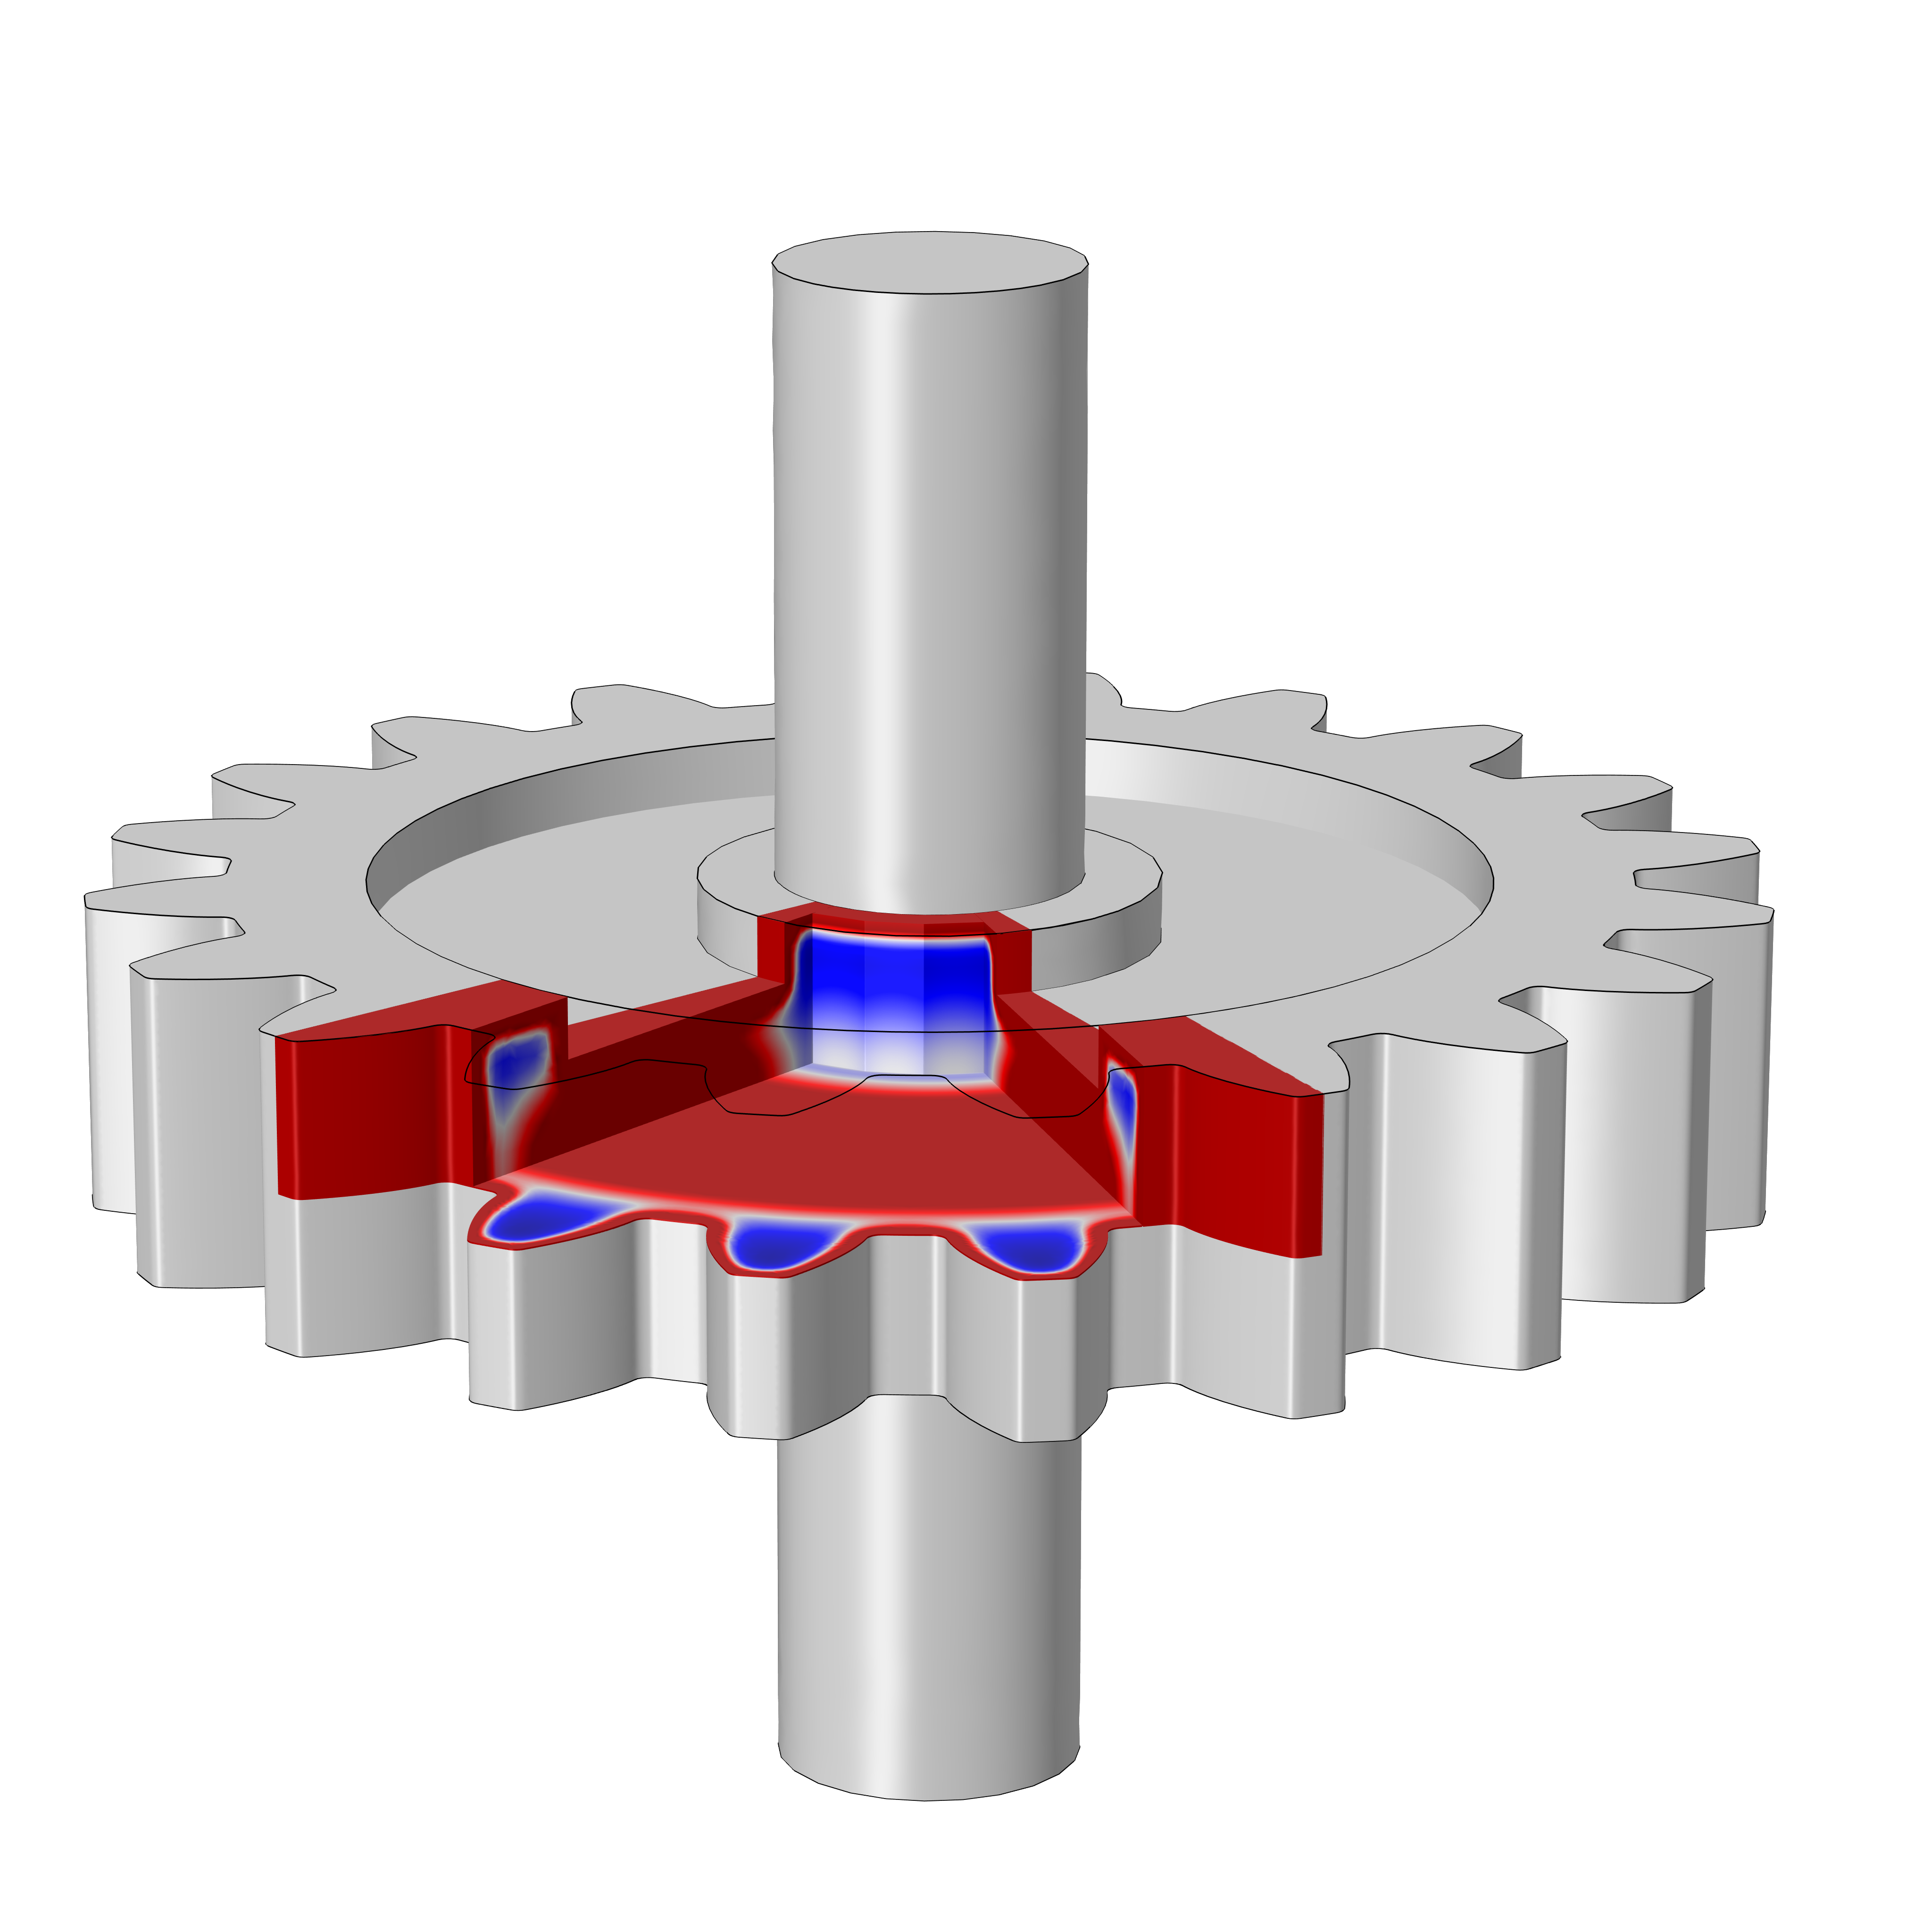 A gray metal spur gear model with a small slice shown in red, white, and blue.